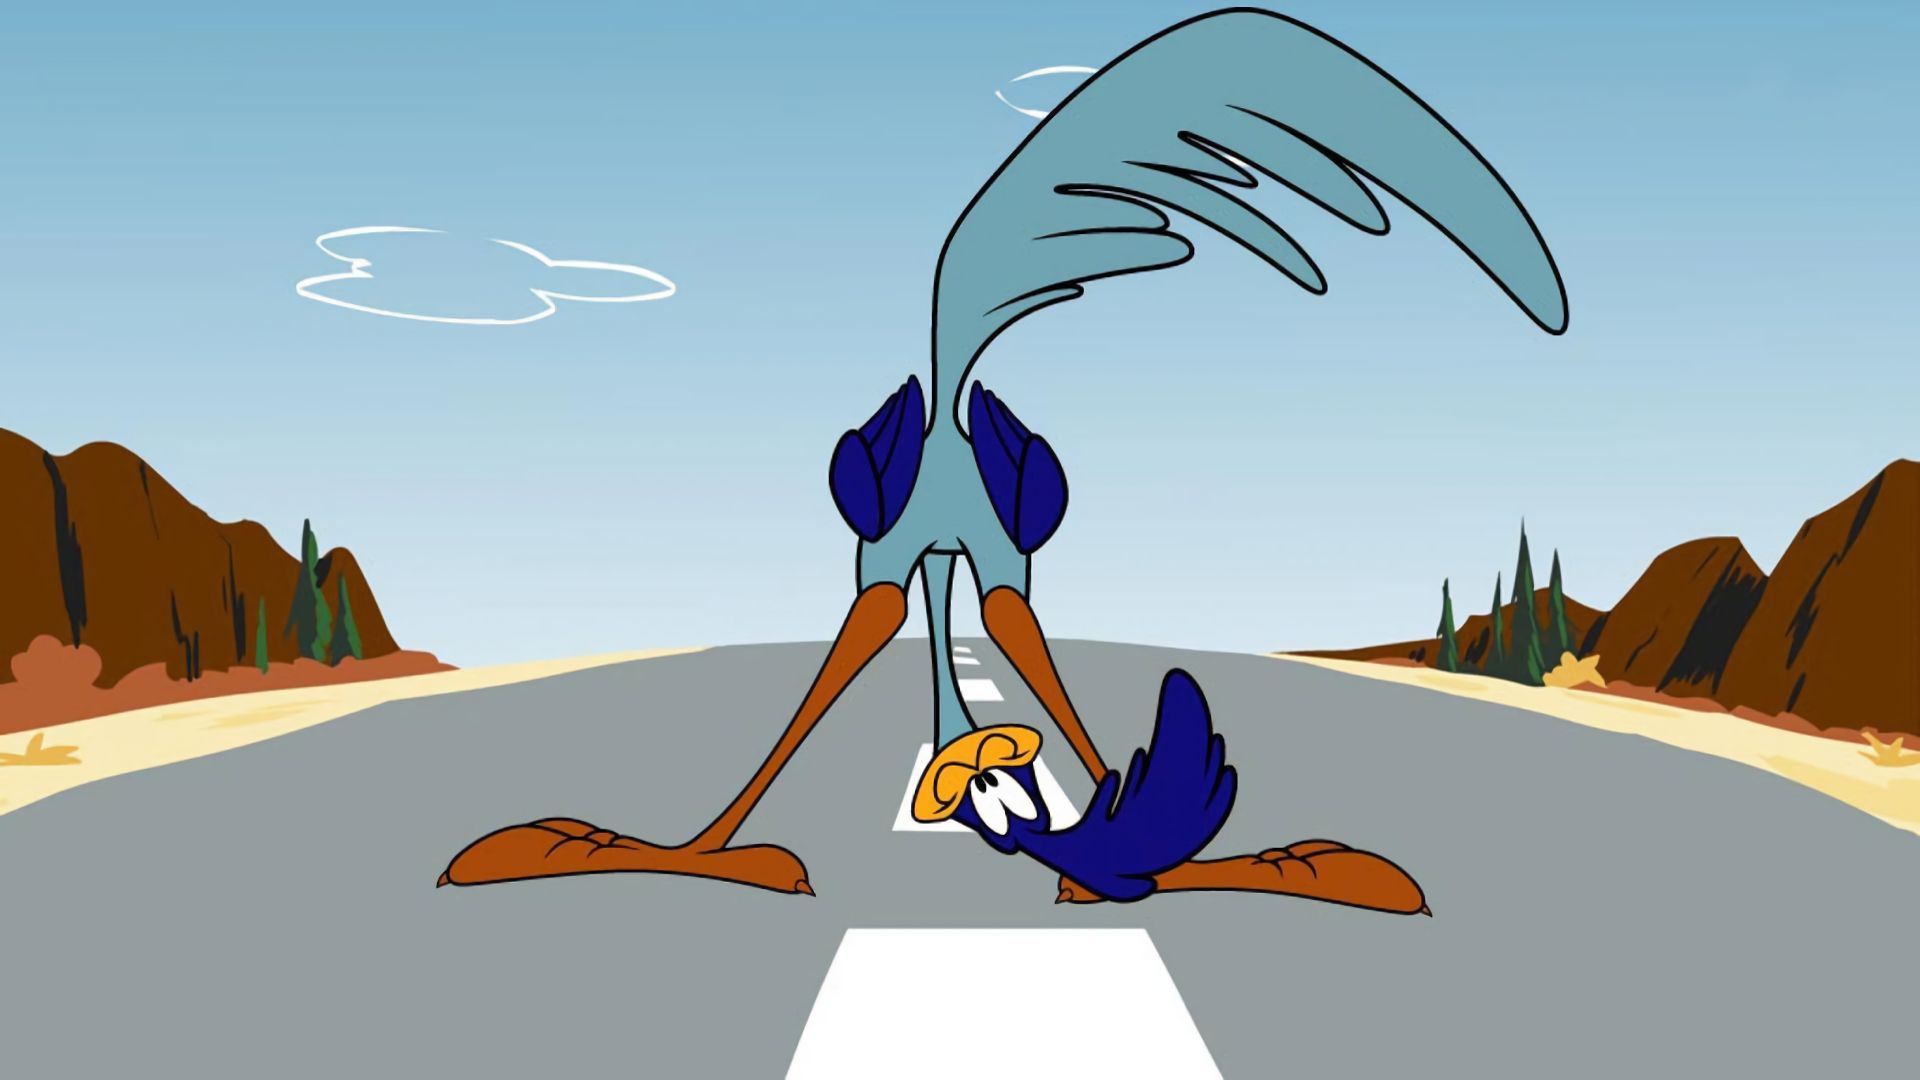 roadrunner and wile e coyote backgrounds